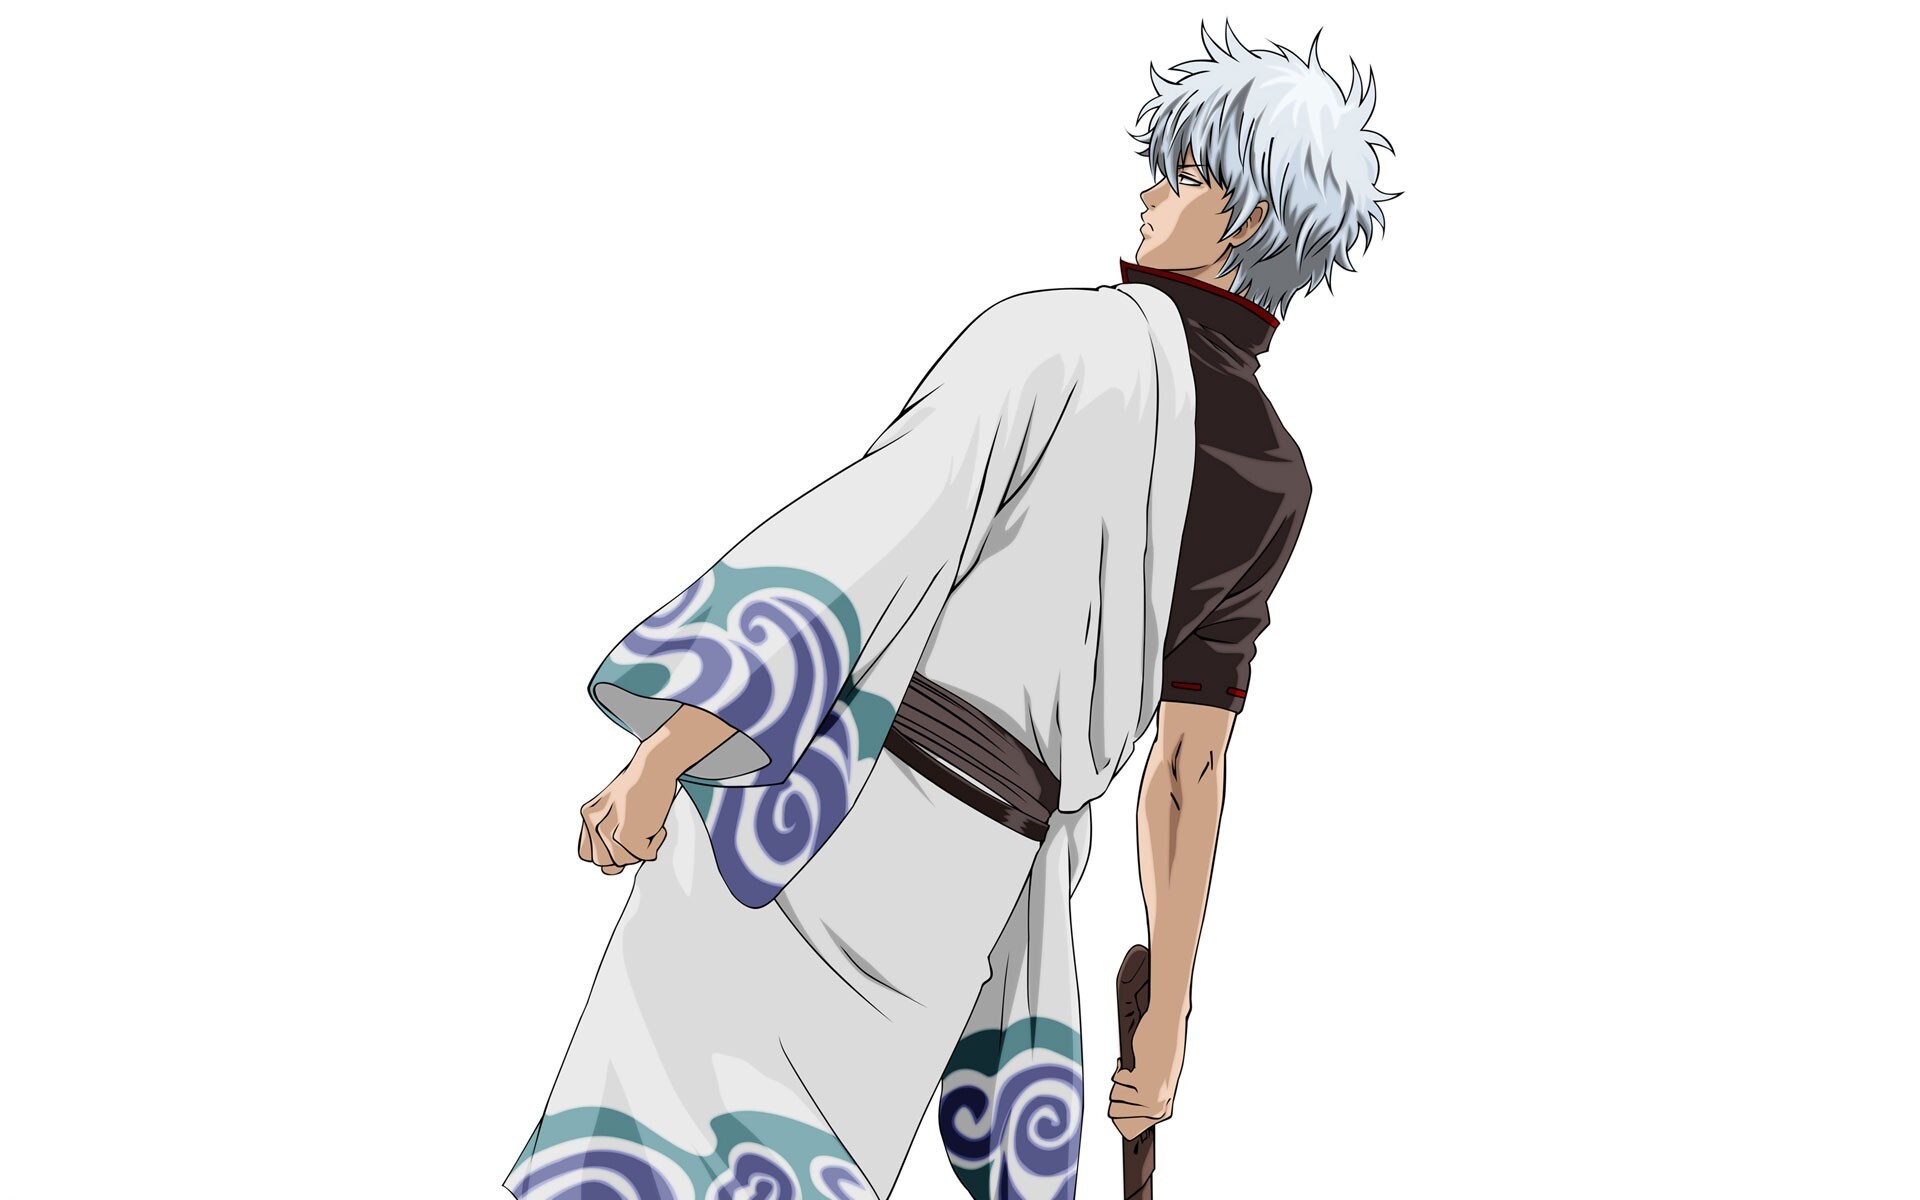 Gintama (TV Series): Gintoki's physical strength, Extreme level of endurance, A highly-skilled samurai. 1920x1200 HD Wallpaper.